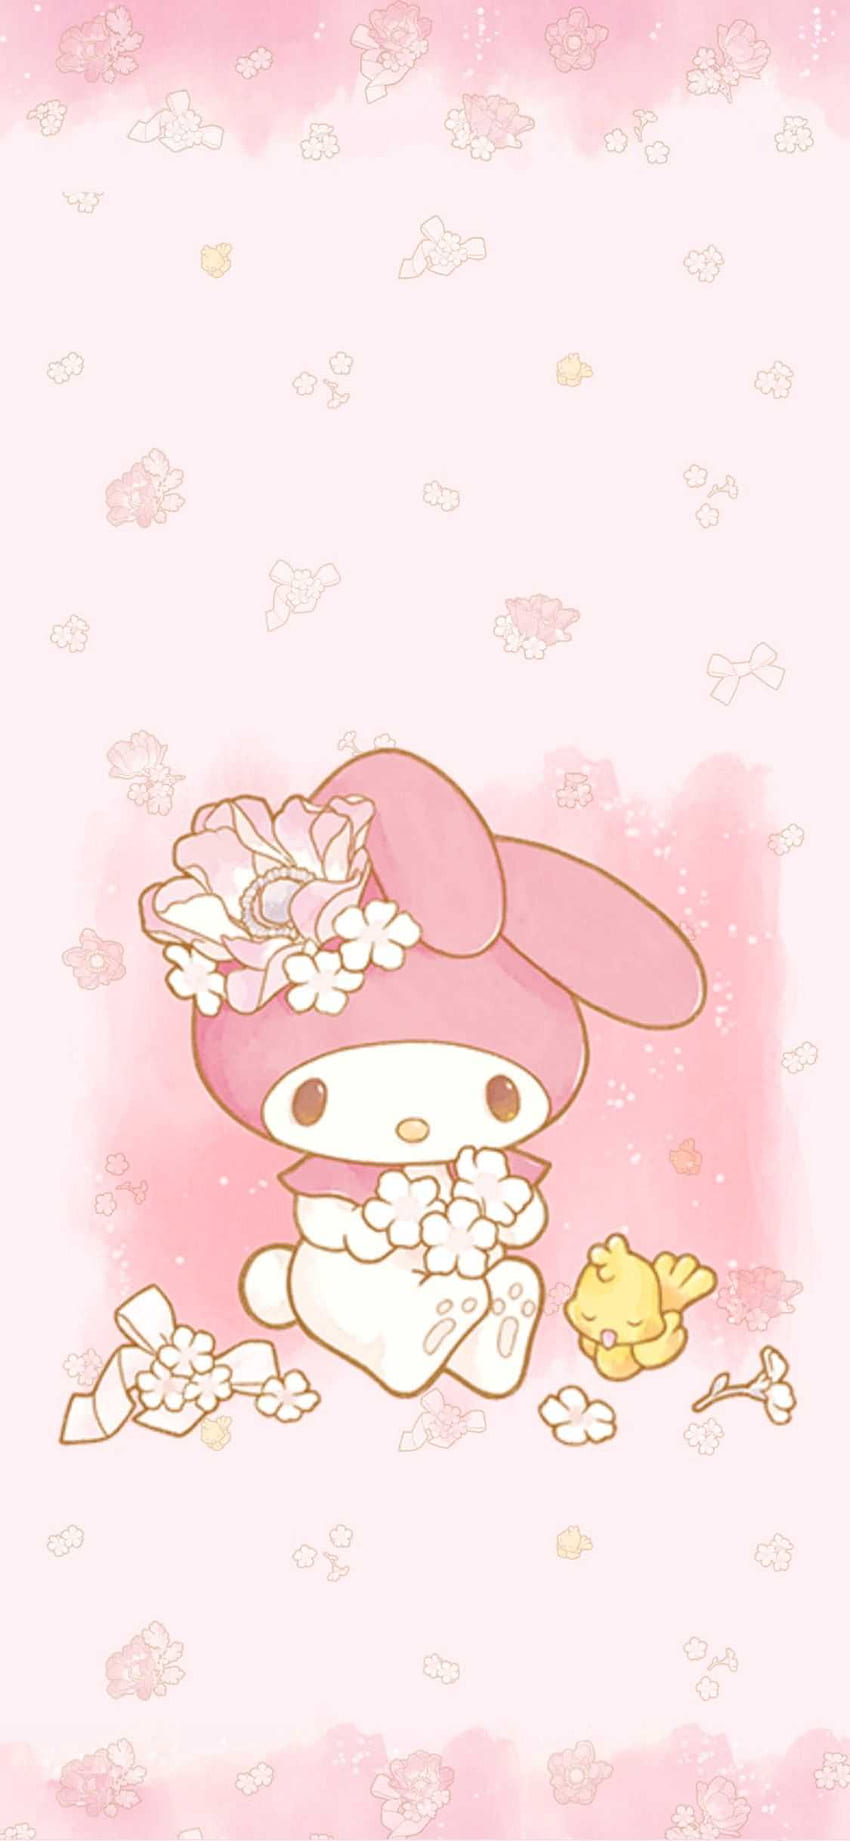 Wallpaper ID 381032  Anime Onegai My Melody Phone Wallpaper  1080x1920  free download